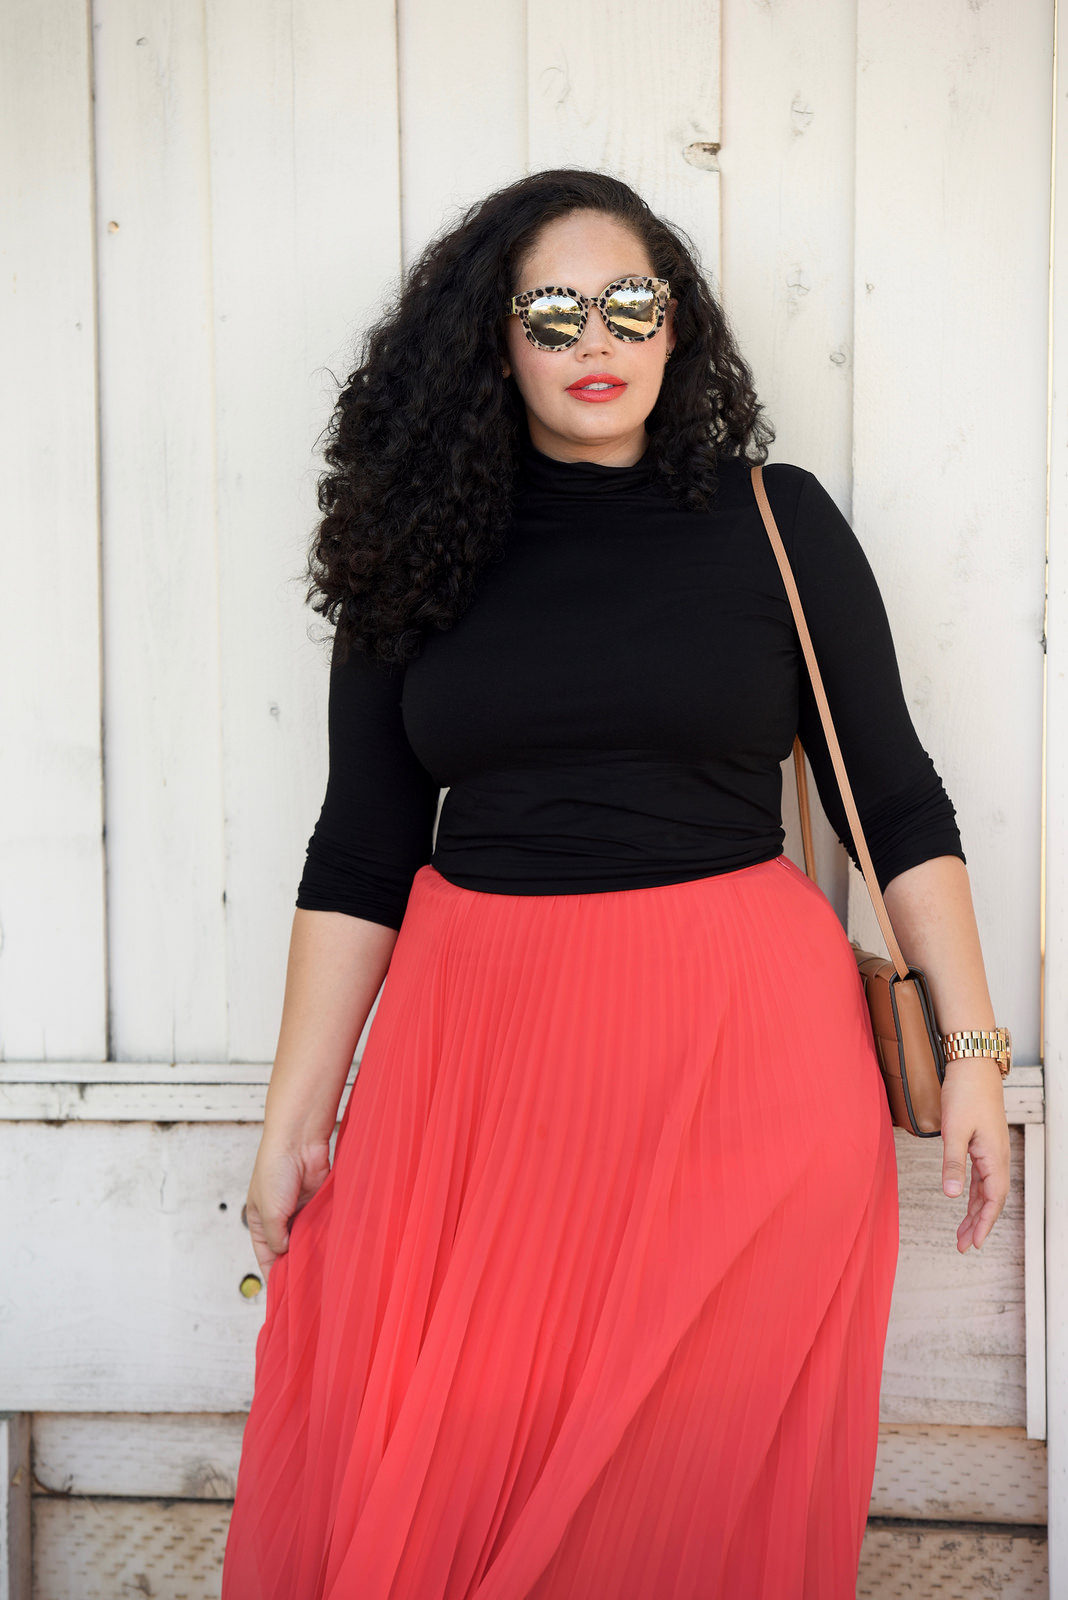 Red Maxi Skirt and turtleneck worn by tanesha Awasthi of Girl With Curves